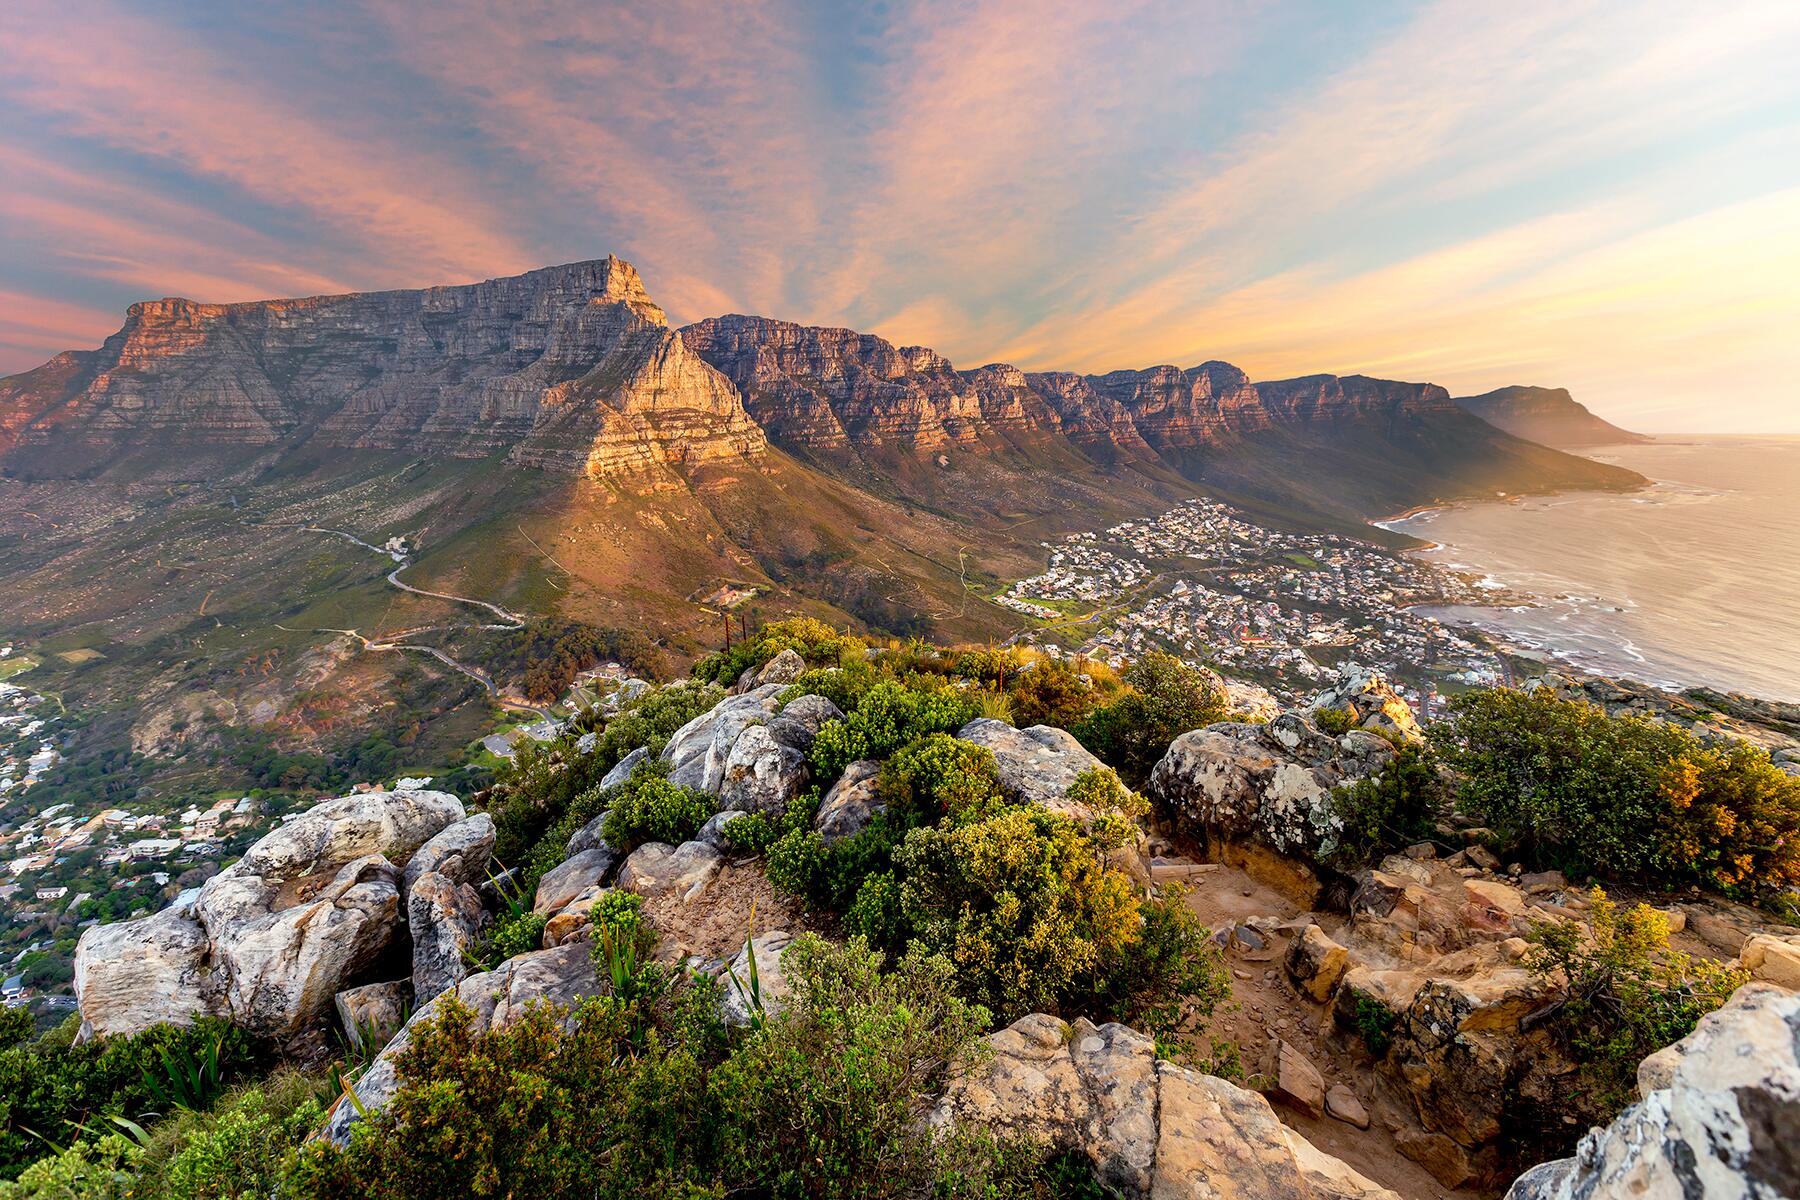 <a href='https://www.fodors.com/world/africa-and-middle-east/south-africa/cape-town-and-peninsula/experiences/news/photos/table-mountain-101-everything-you-need-to-know-about-visiting-cape-towns-iconic-landmark#'>From &quot;Table Mountain 101: Everything You Need to Know About Visiting Cape Town's Iconic Landmark: Do I Need a Guide?&quot;</a>